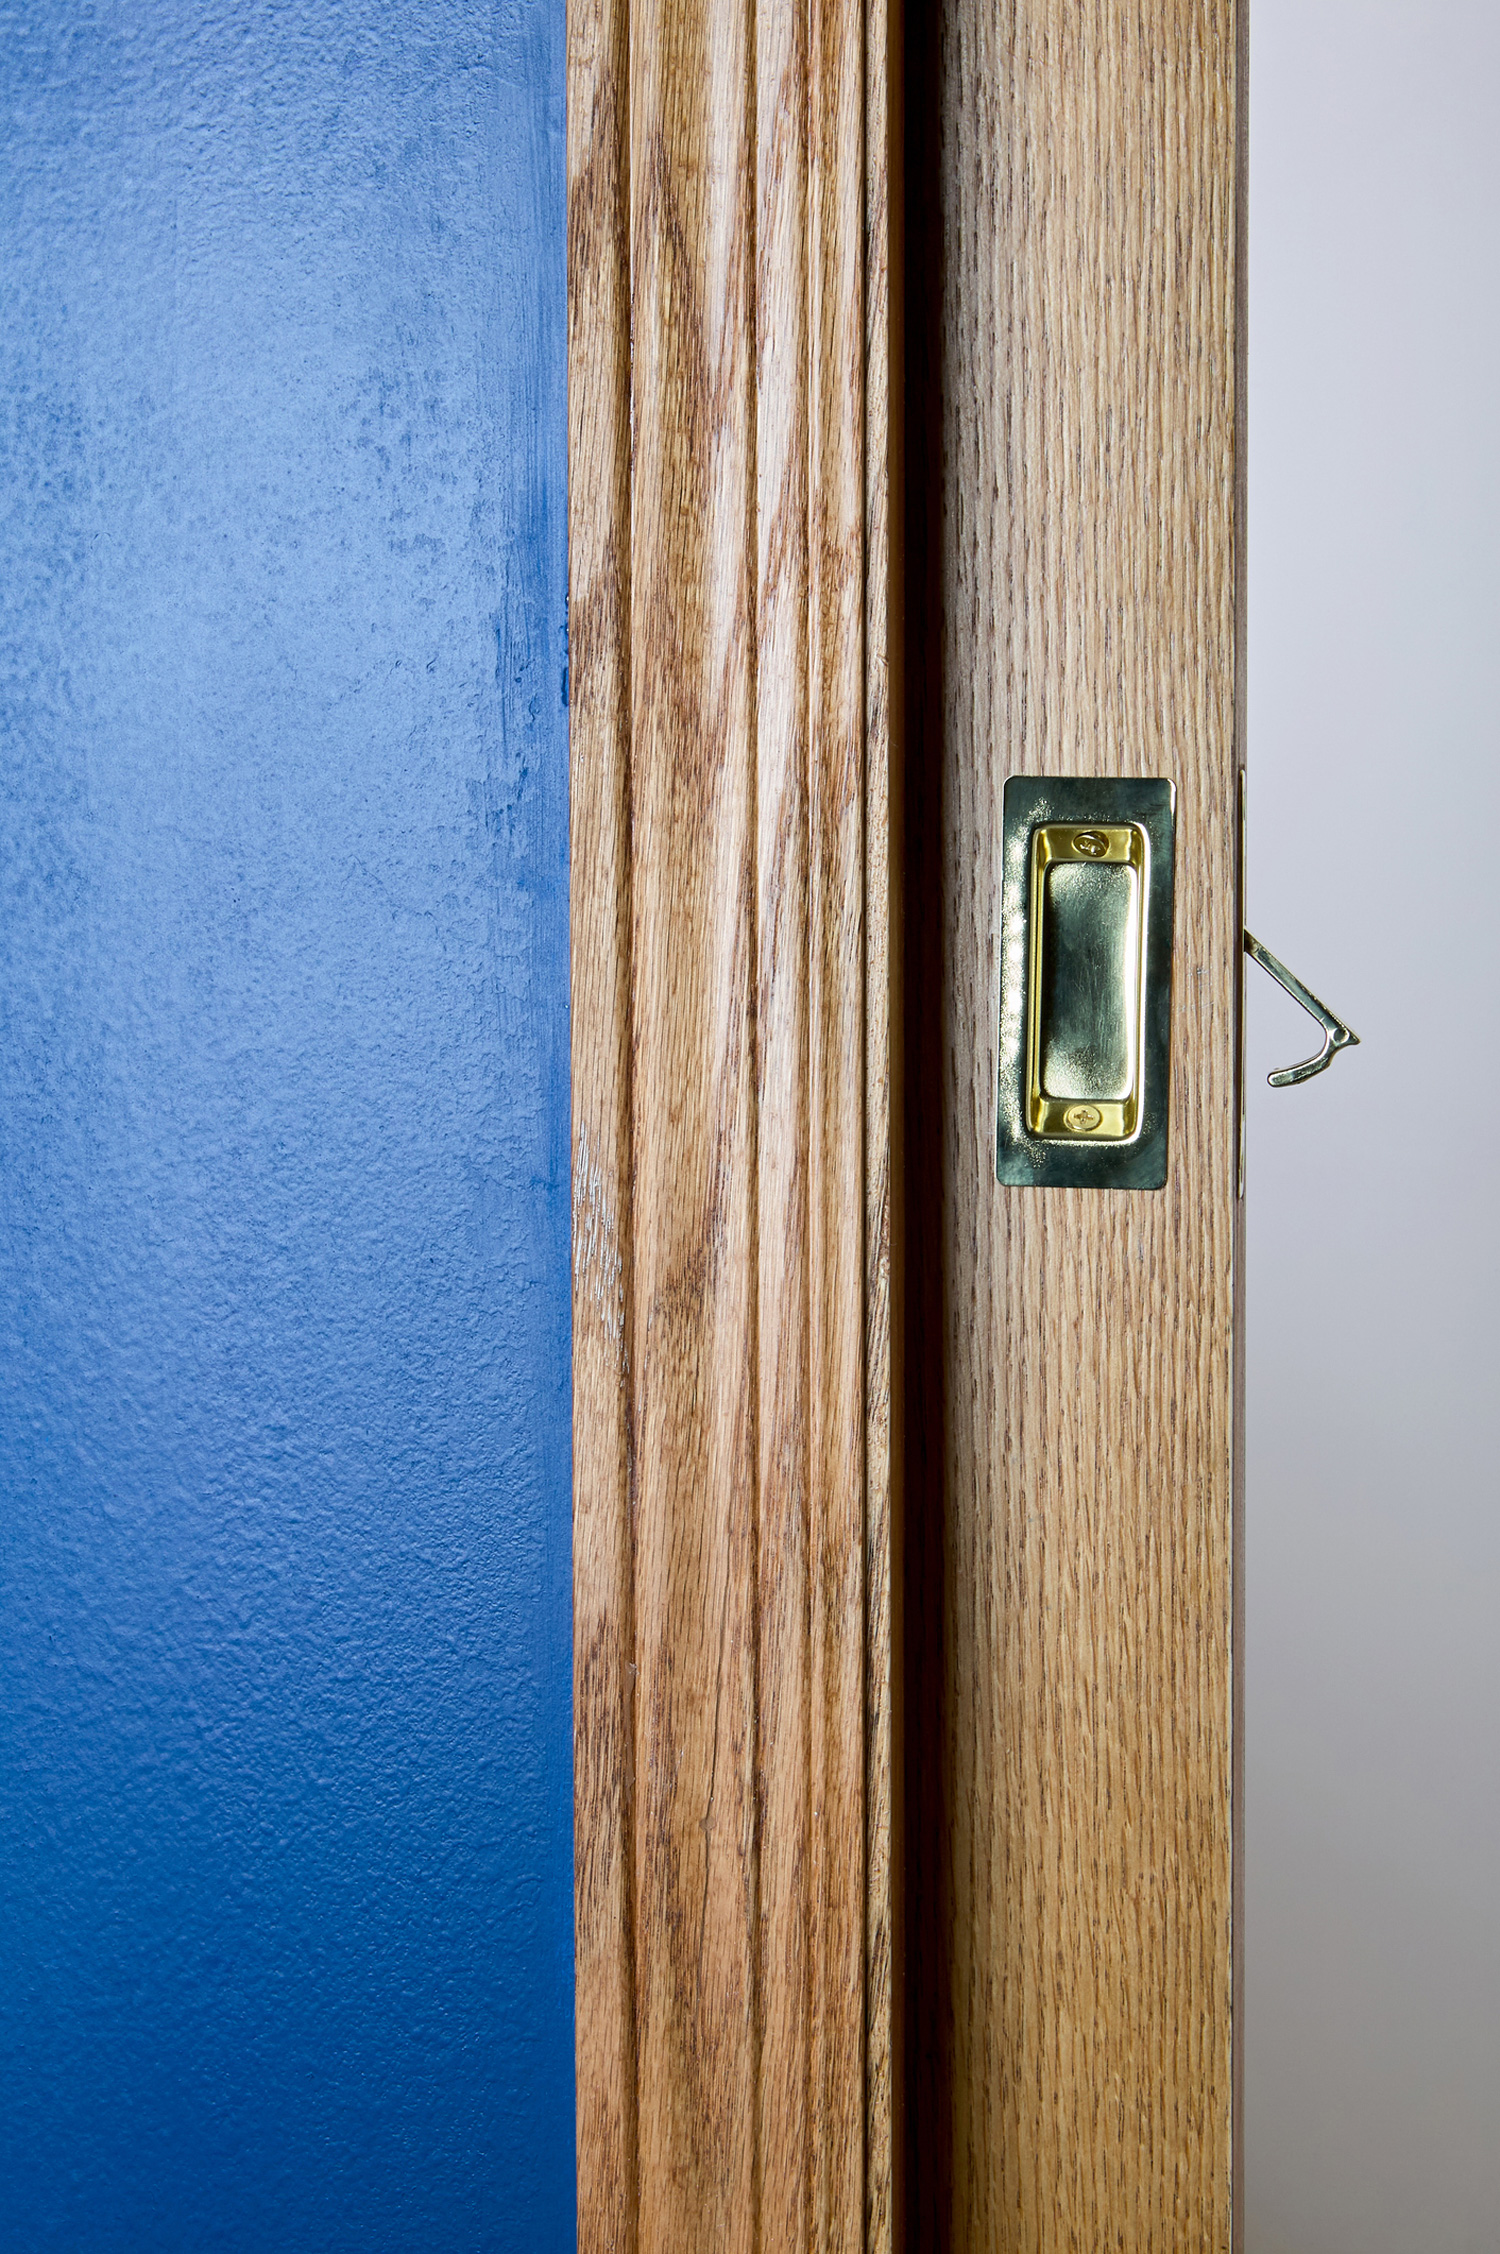 Open sliding wooden pocket door concealed with a wall cavity inside a house with close up detail of the handle